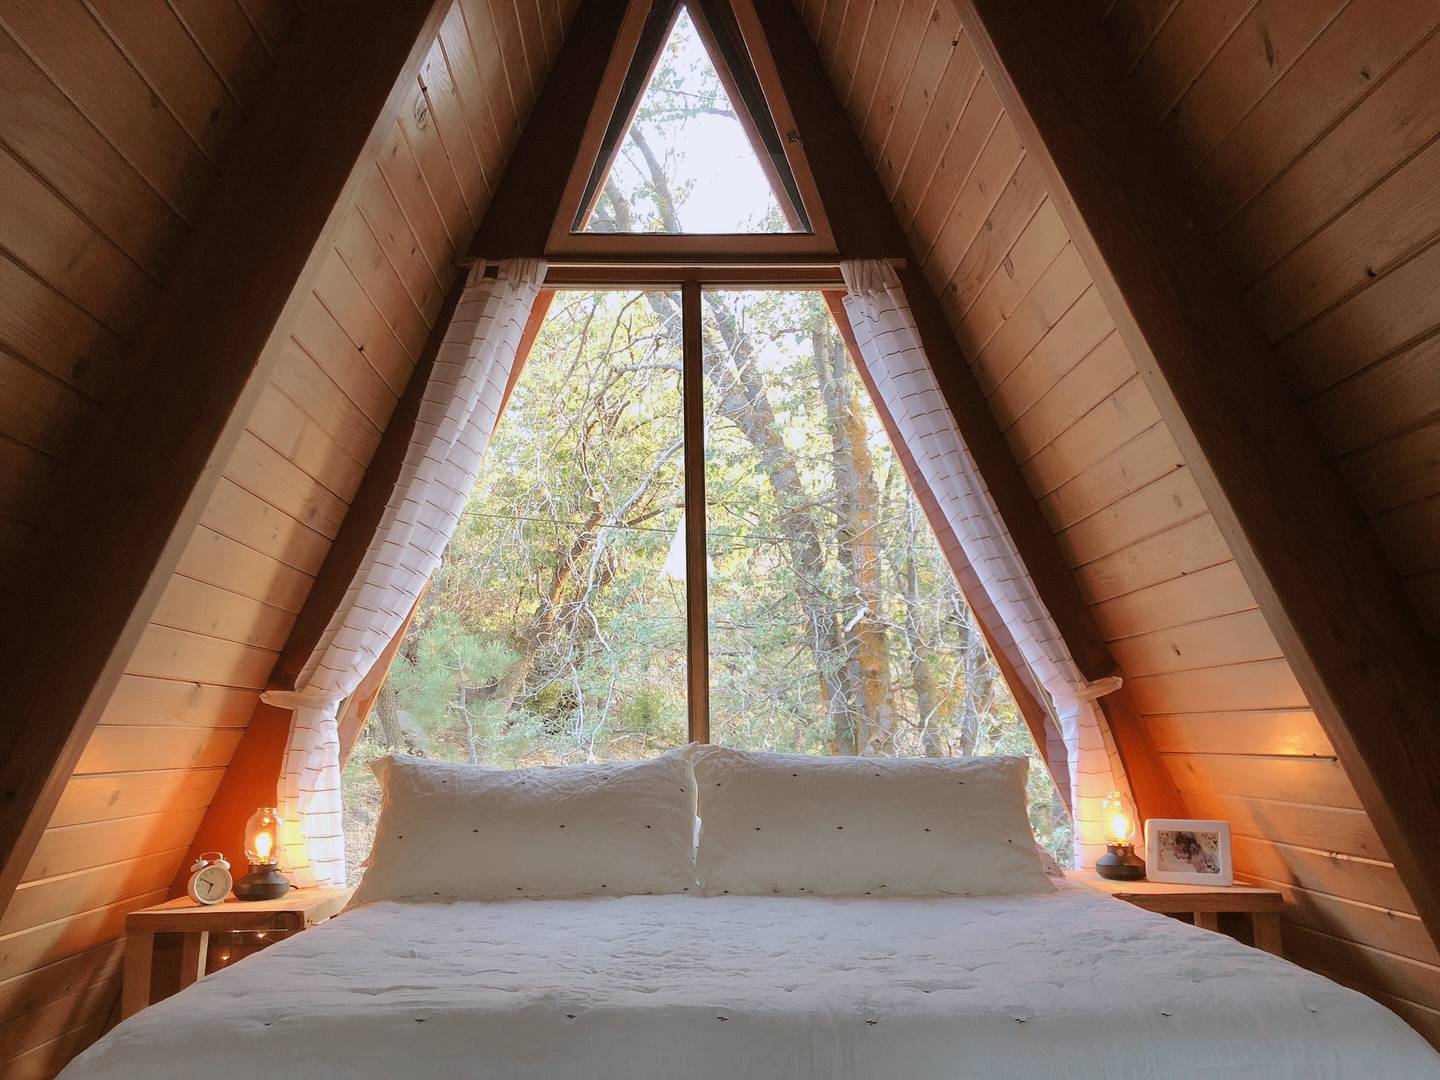 Boho-chic stays await at this A-Frame cabin in California's Running Springs. Photo: Nina Schmidt / Airbnb